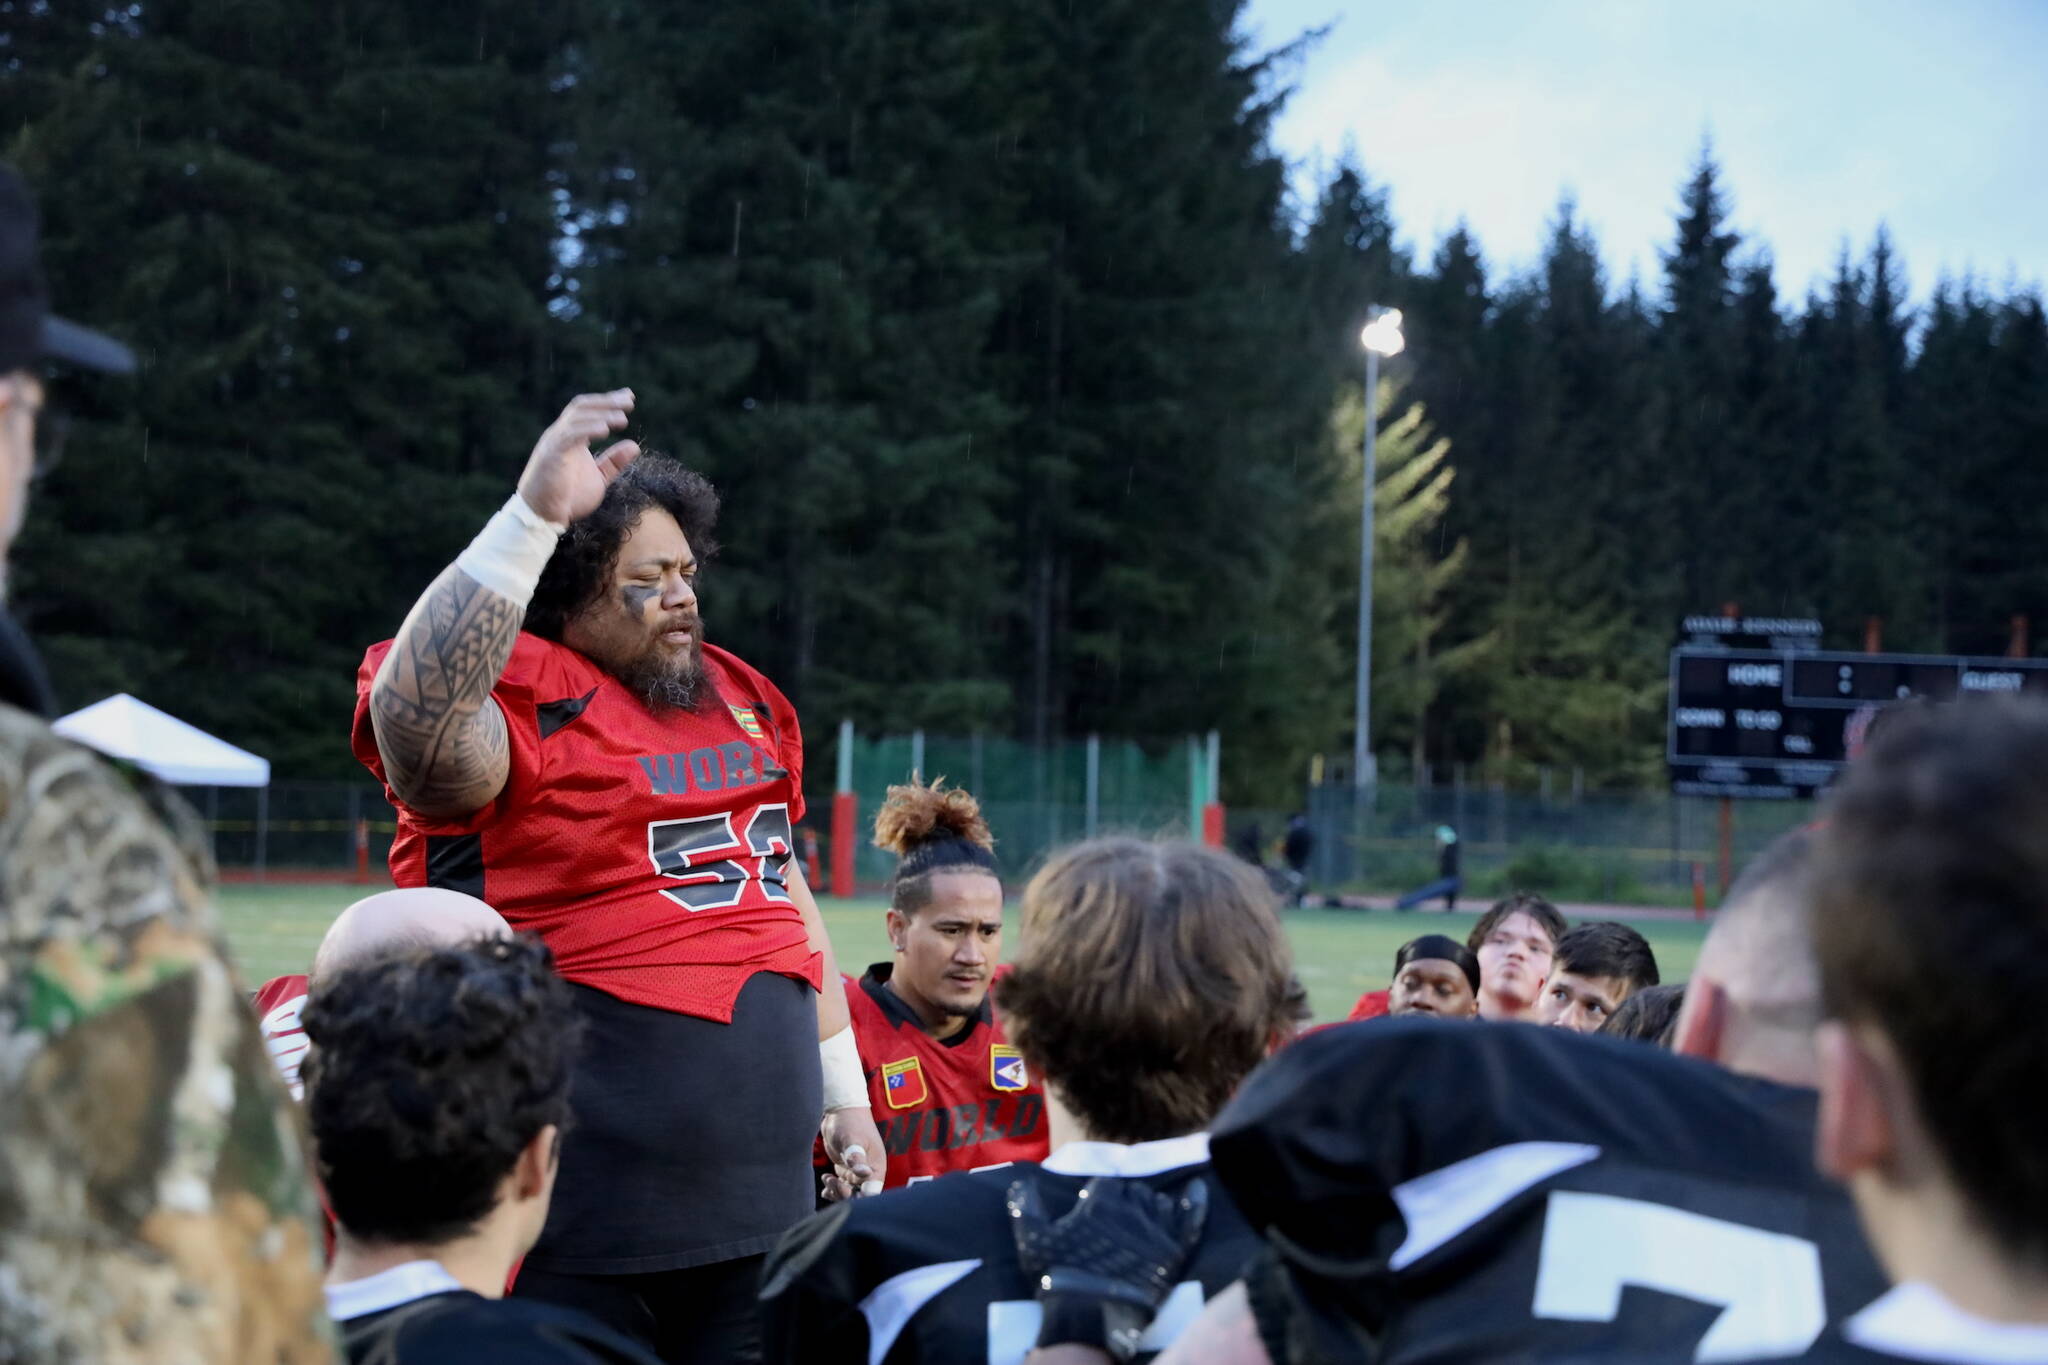 Team World coach and player Lino Fenumiai says a prayer over both teams after the Juneau Alumni Football game Friday evening at Adair-Kennedy Field. (Clarise Larson / Juneau Empire)